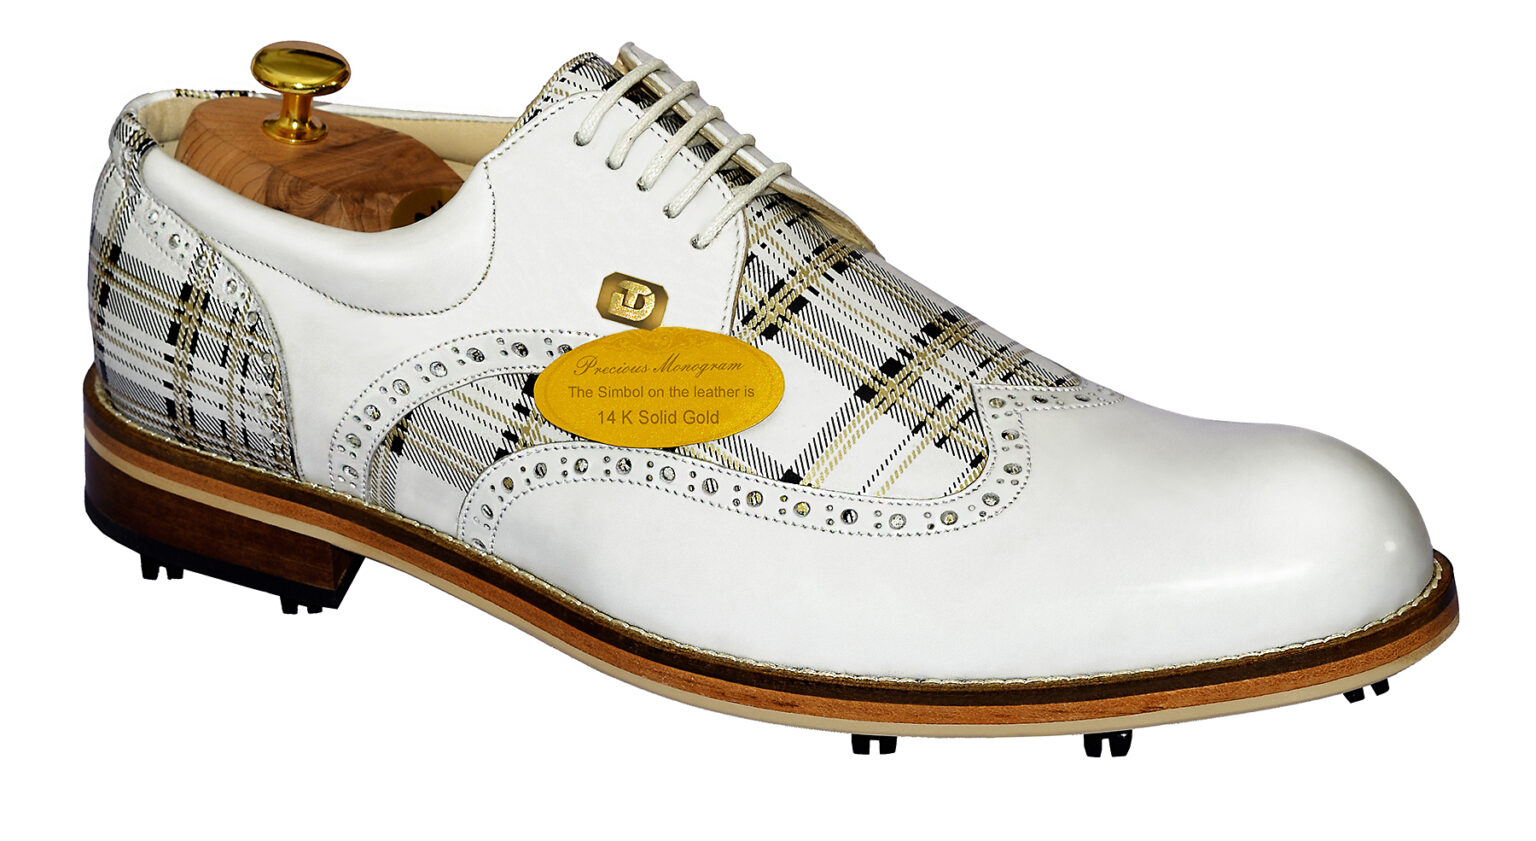 Handmade Derby Personalized Golf Shoes | Dorin Musat - Men's luxury shoes